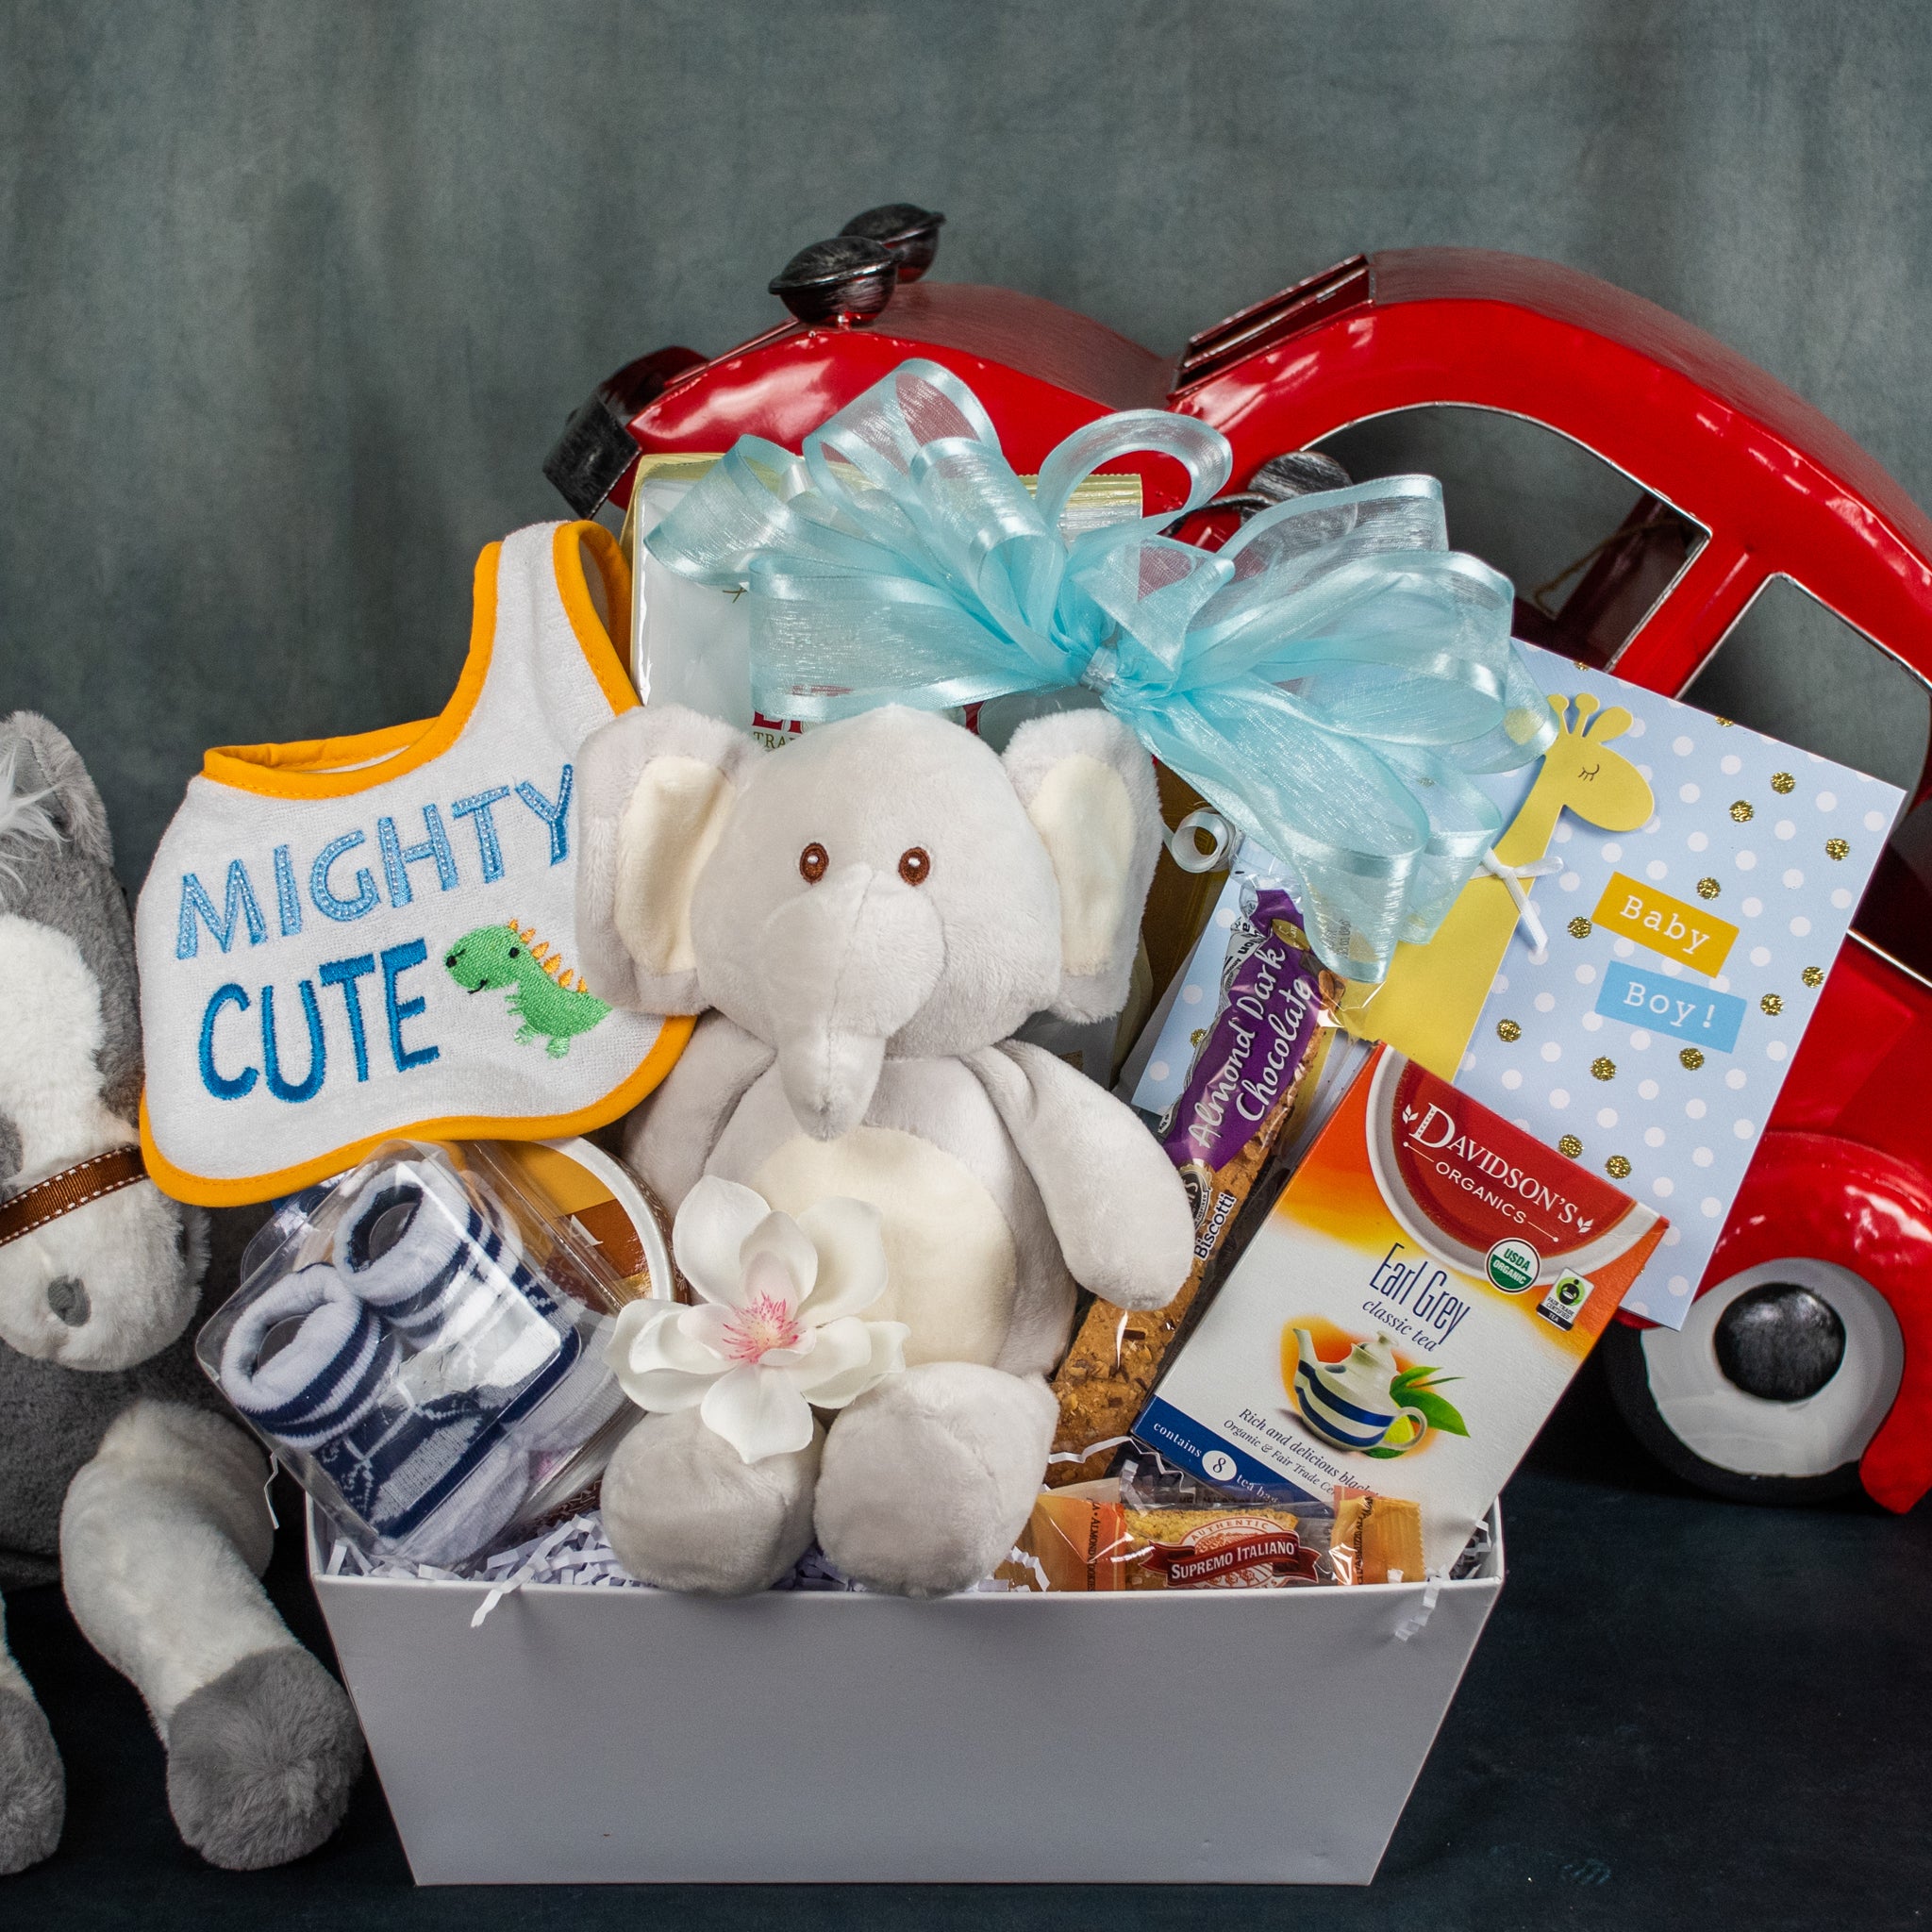 Thank Goodness it's a Boy Gift Basket by Silly Phillie